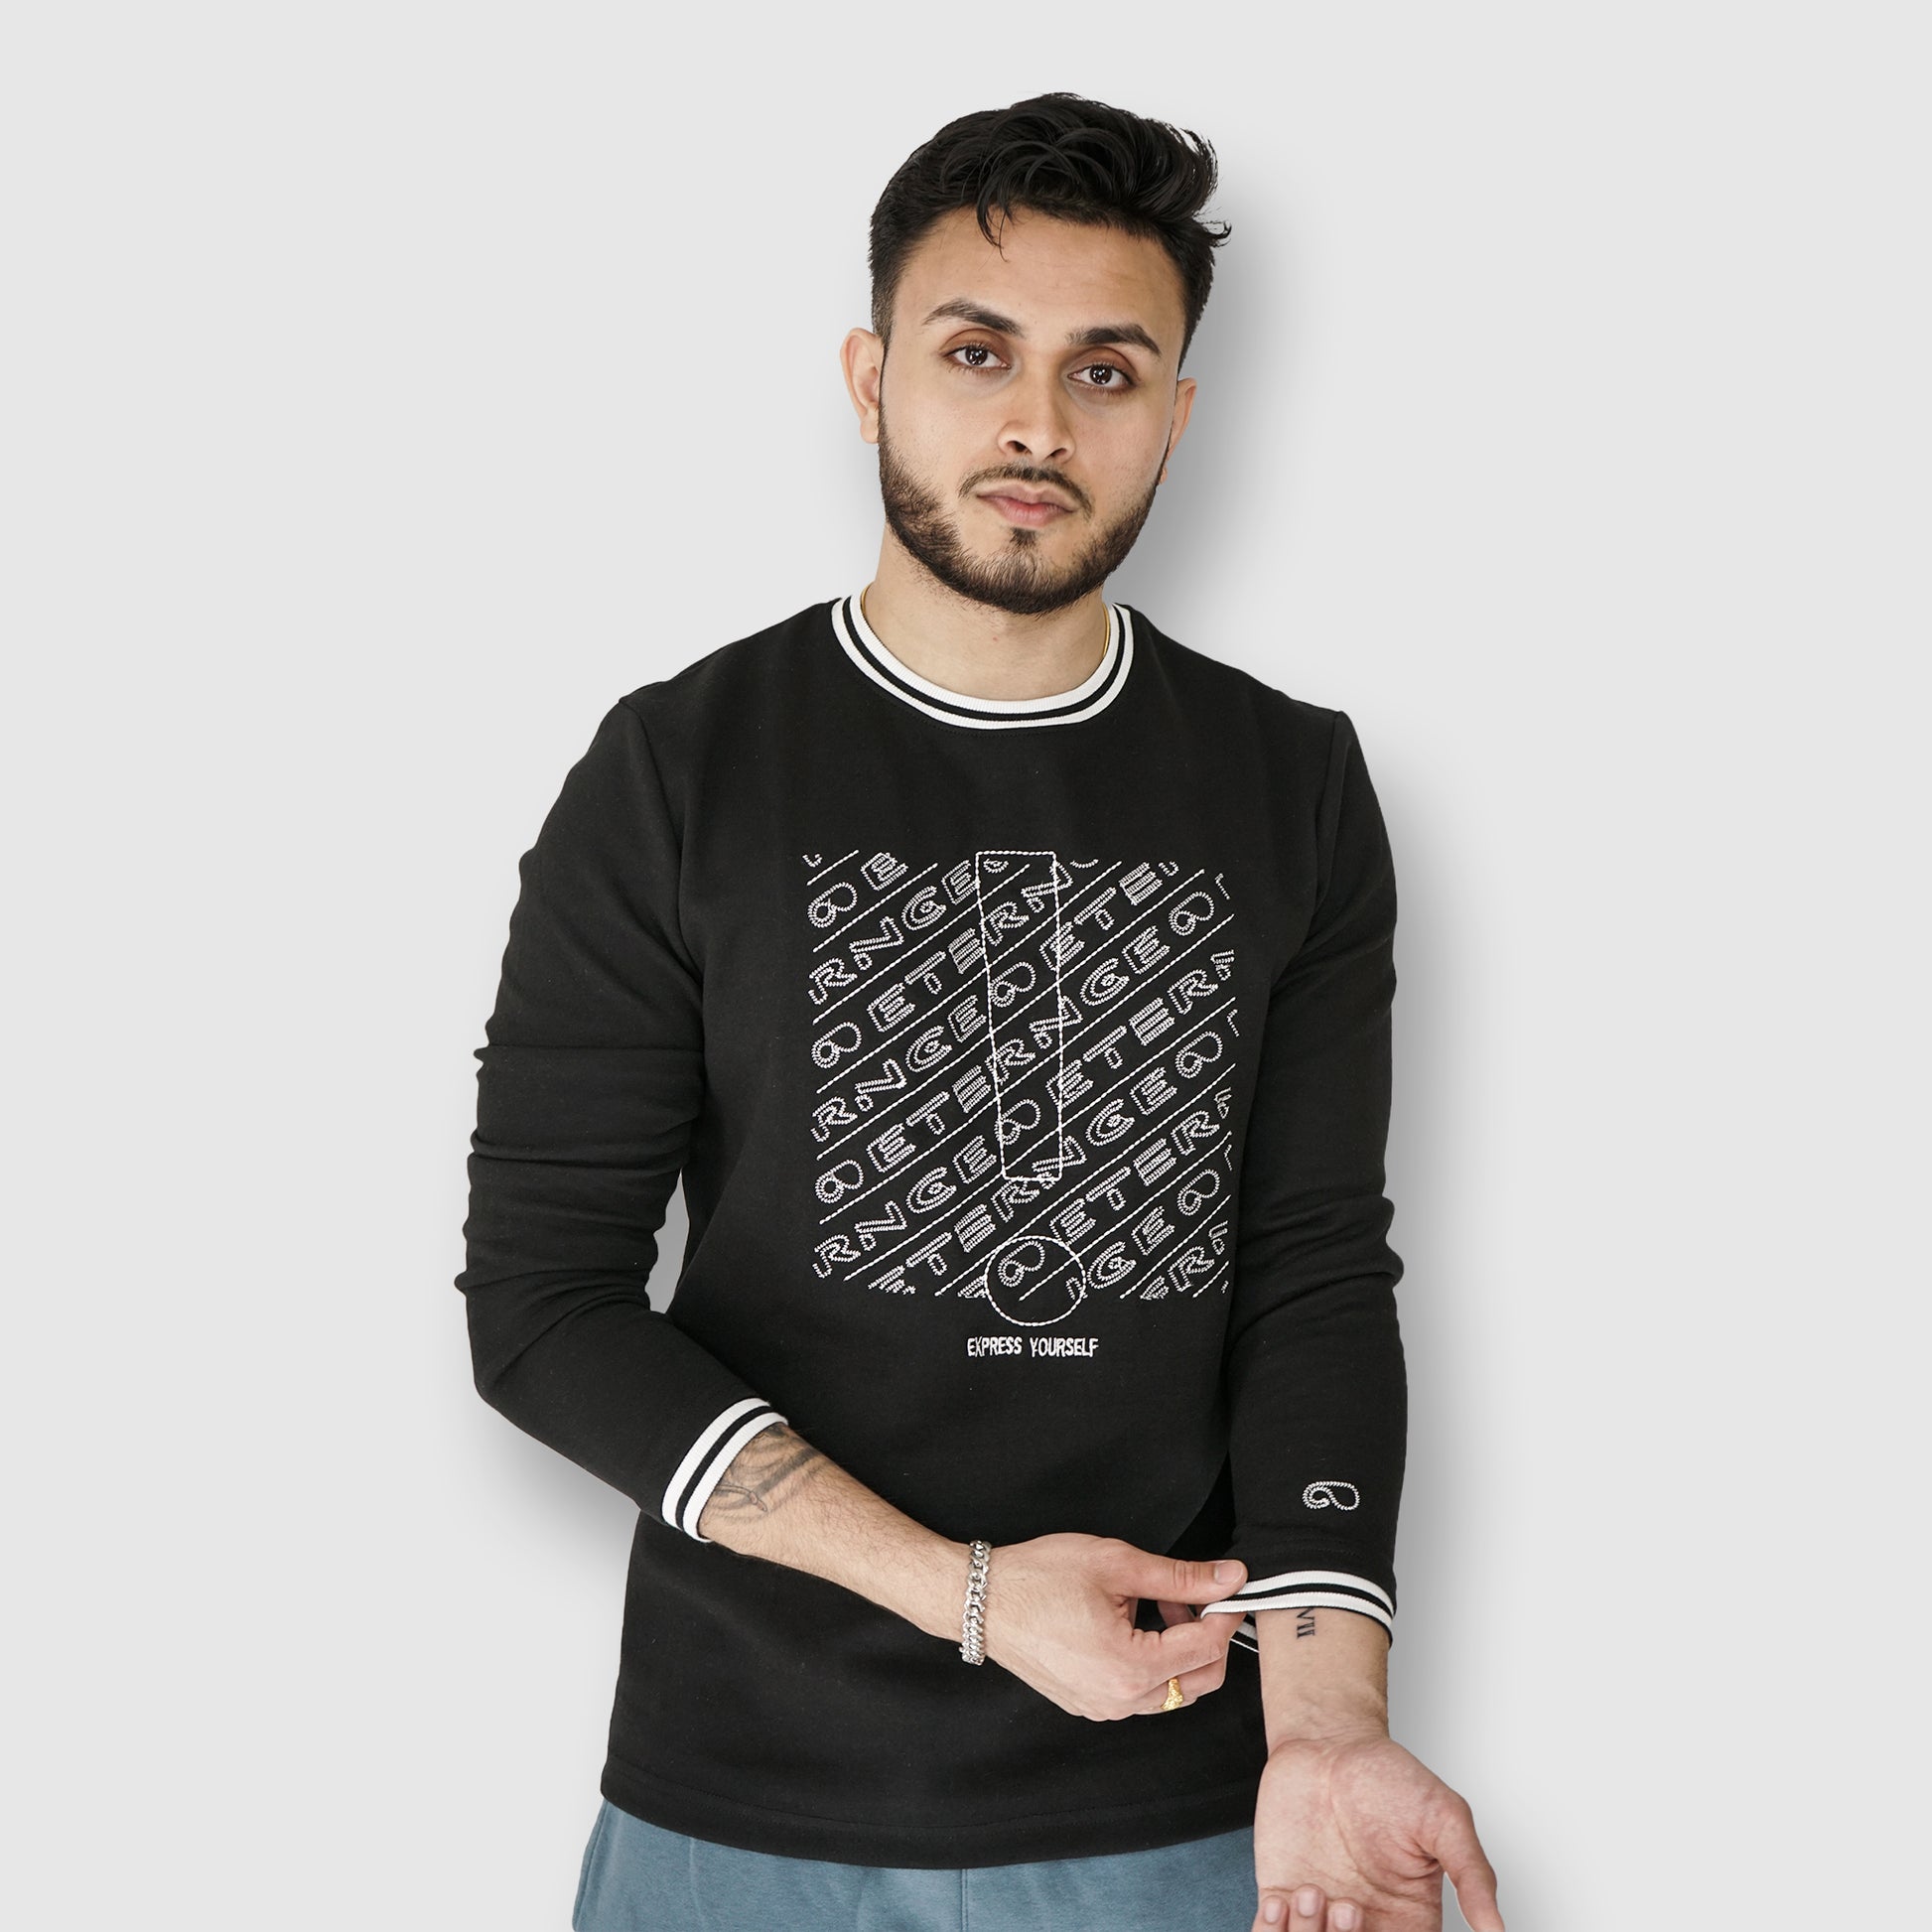 Long Sleeve Tee for Everyone Gender-Neutral Fashion Staple